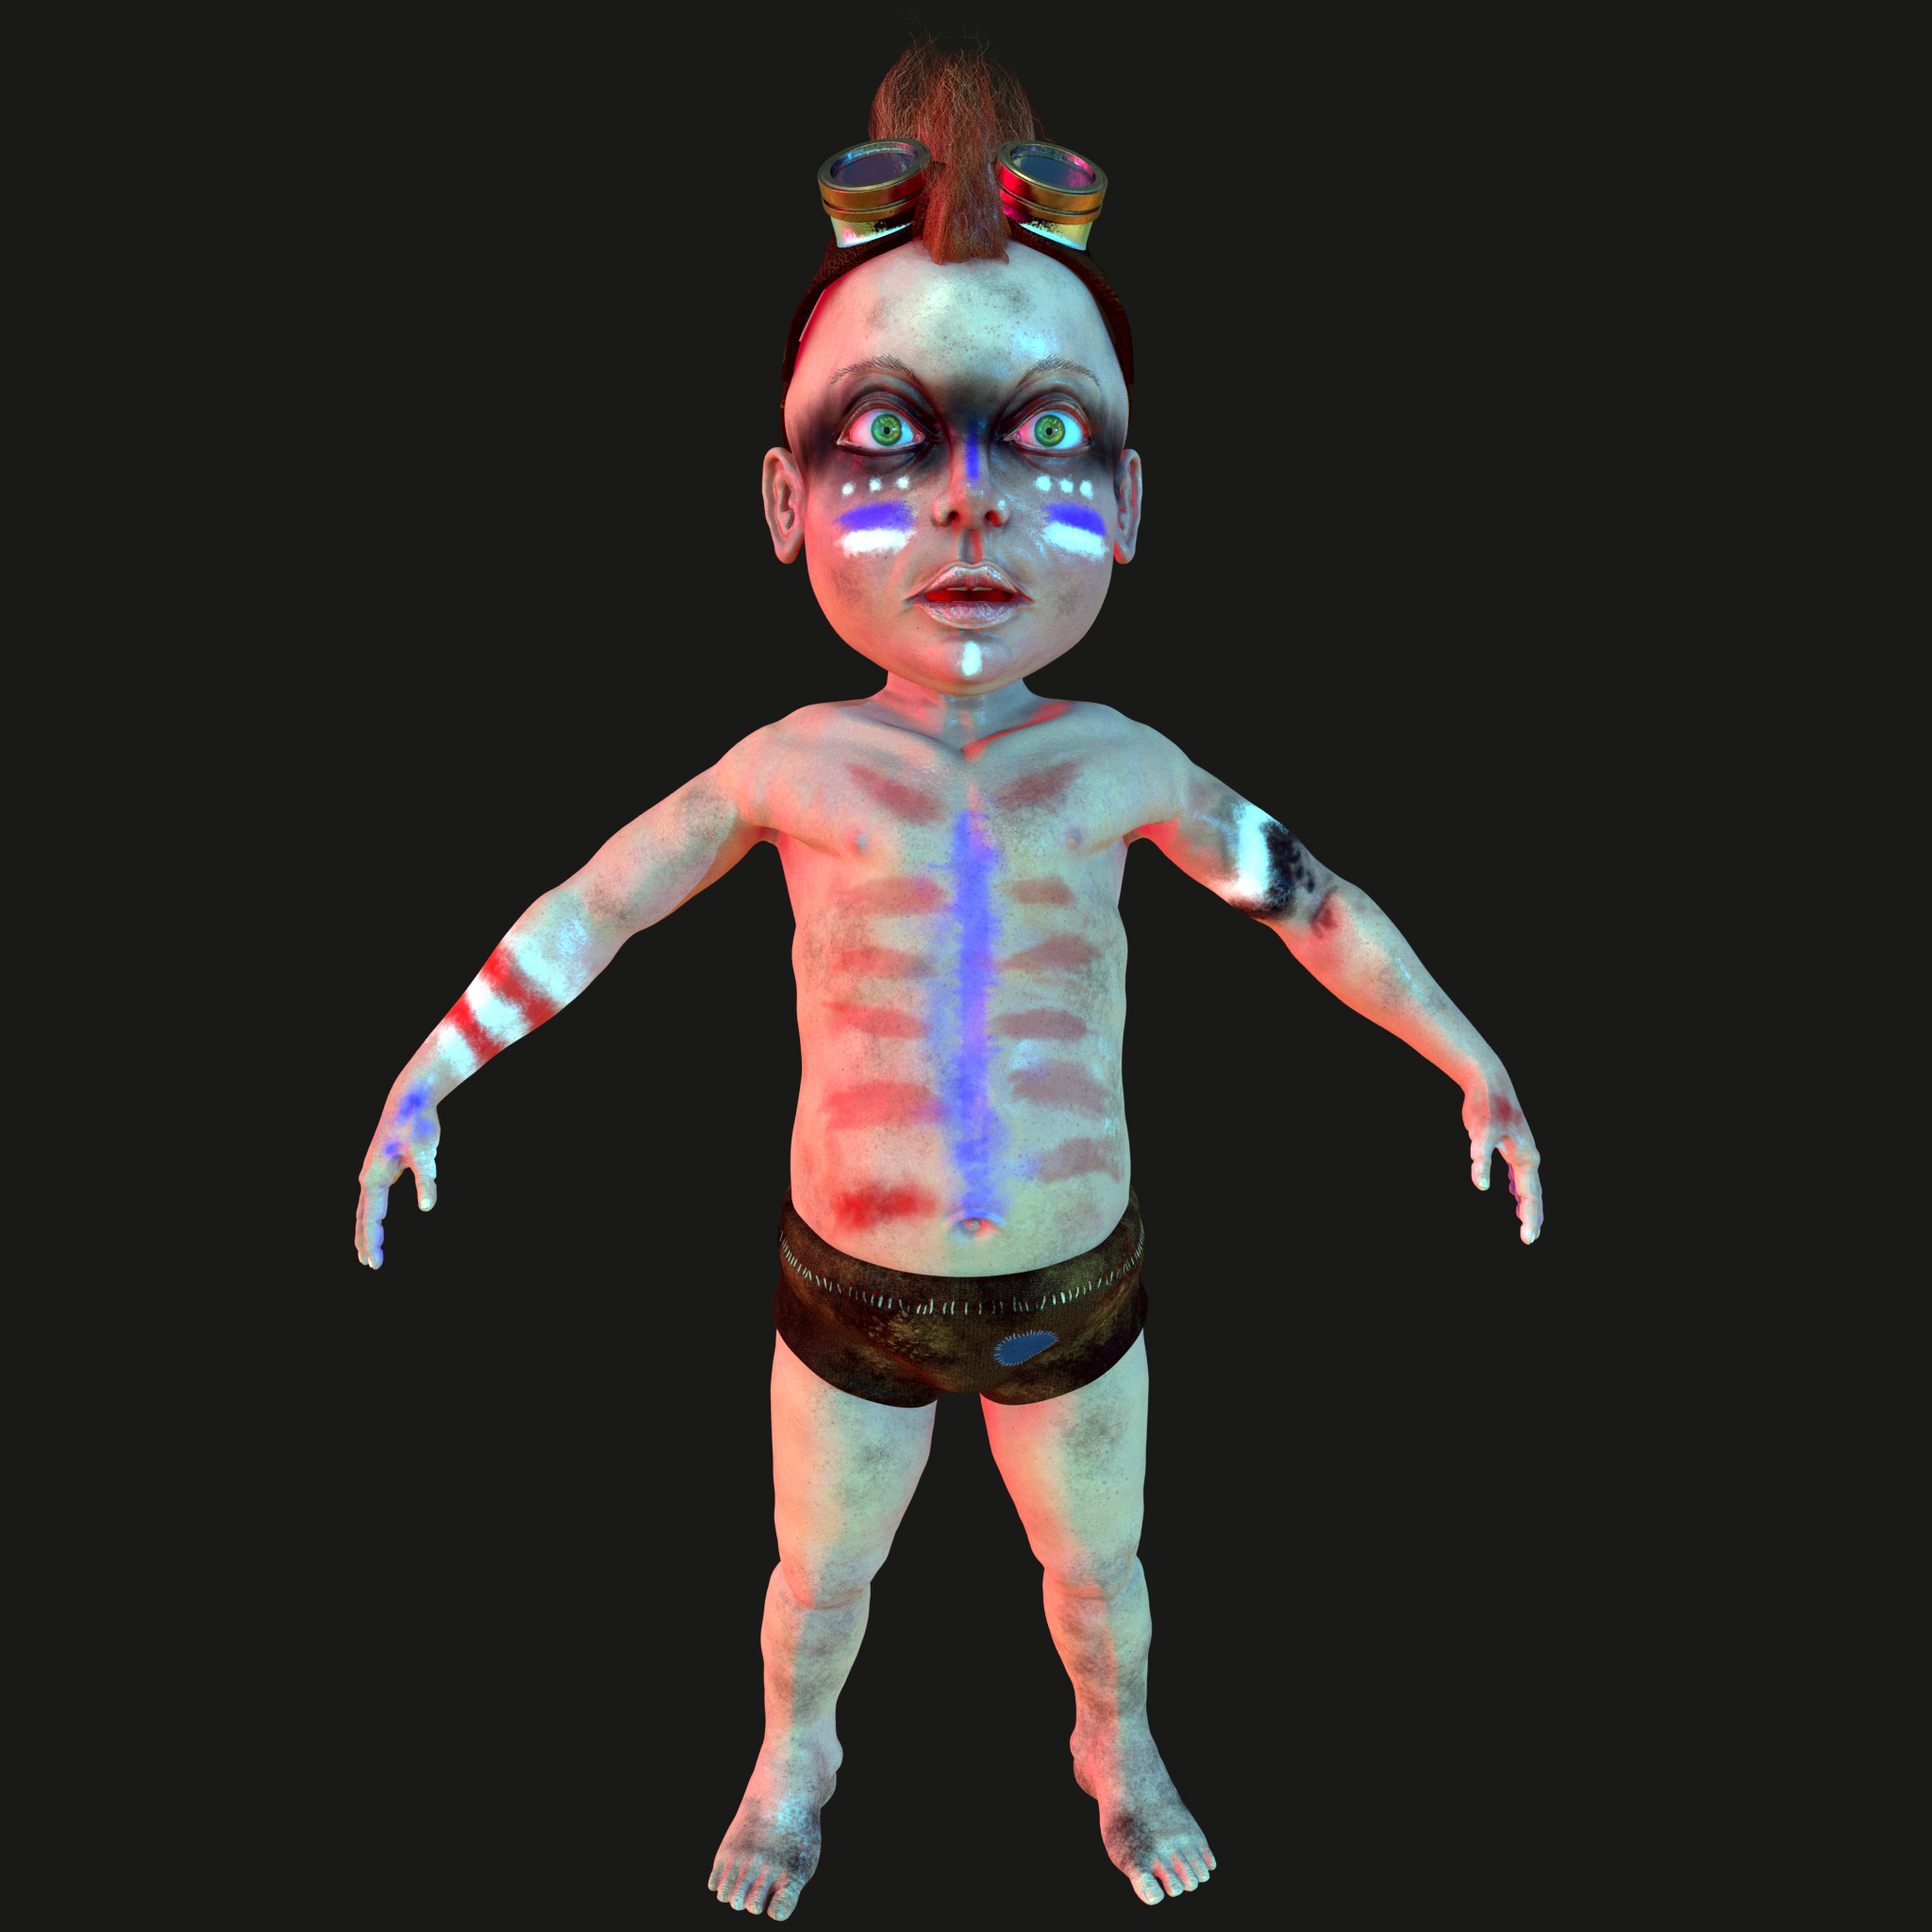 Testlook of baby in Maya, render used - Mental ray. It took 4 days to make the whole character.